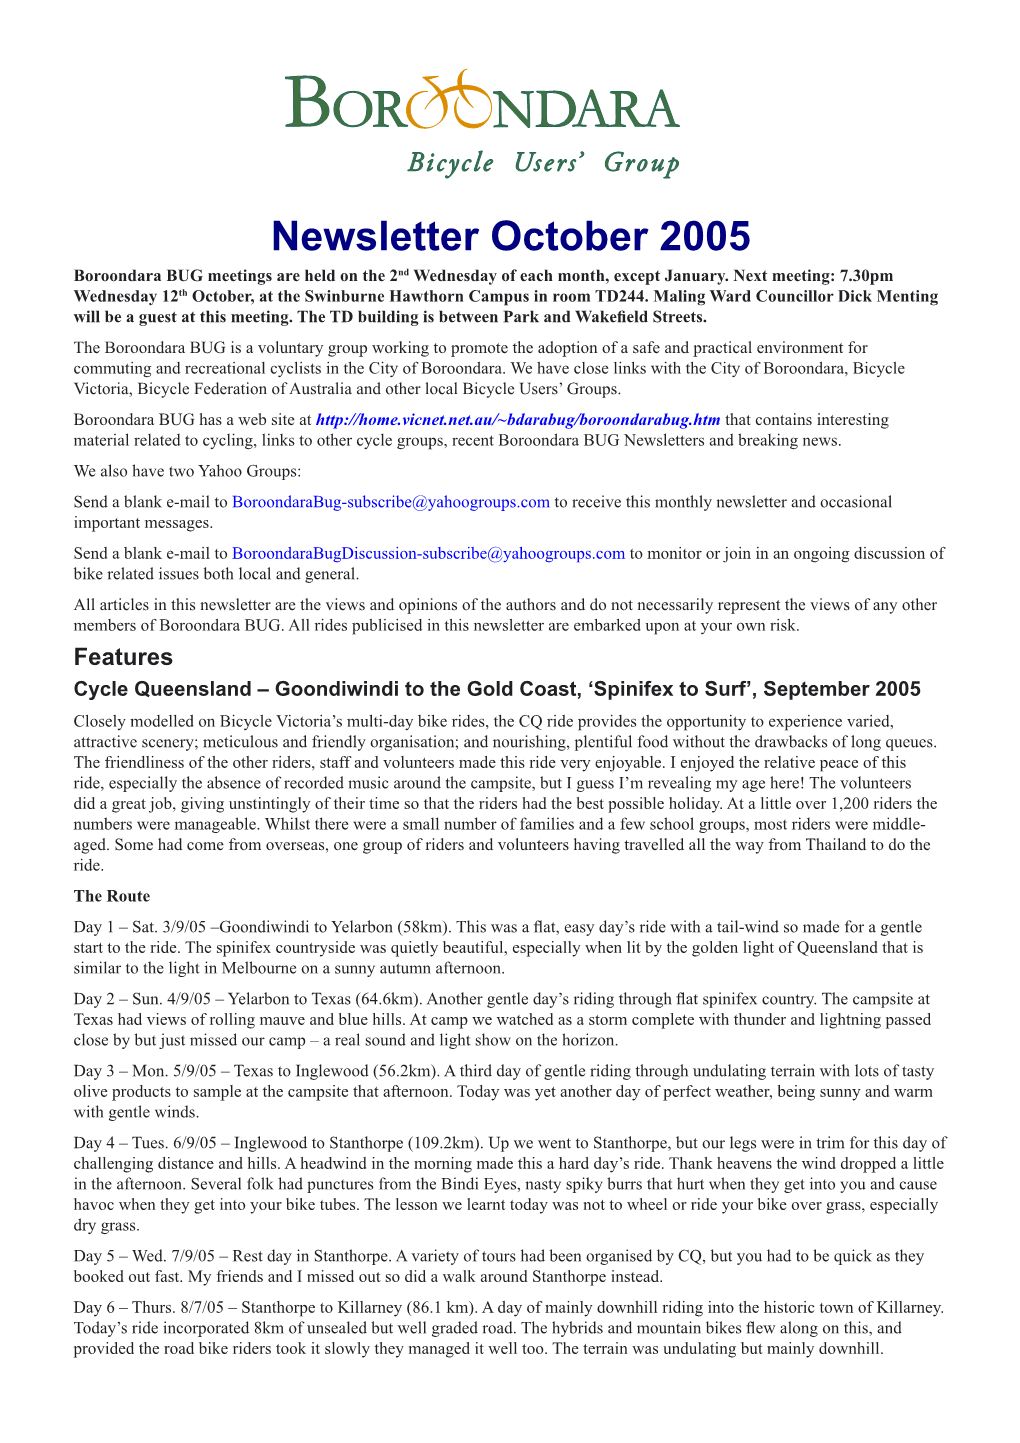 Newsletter October 2005 Boroondara BUG Meetings Are Held on the 2Nd Wednesday of Each Month, Except January